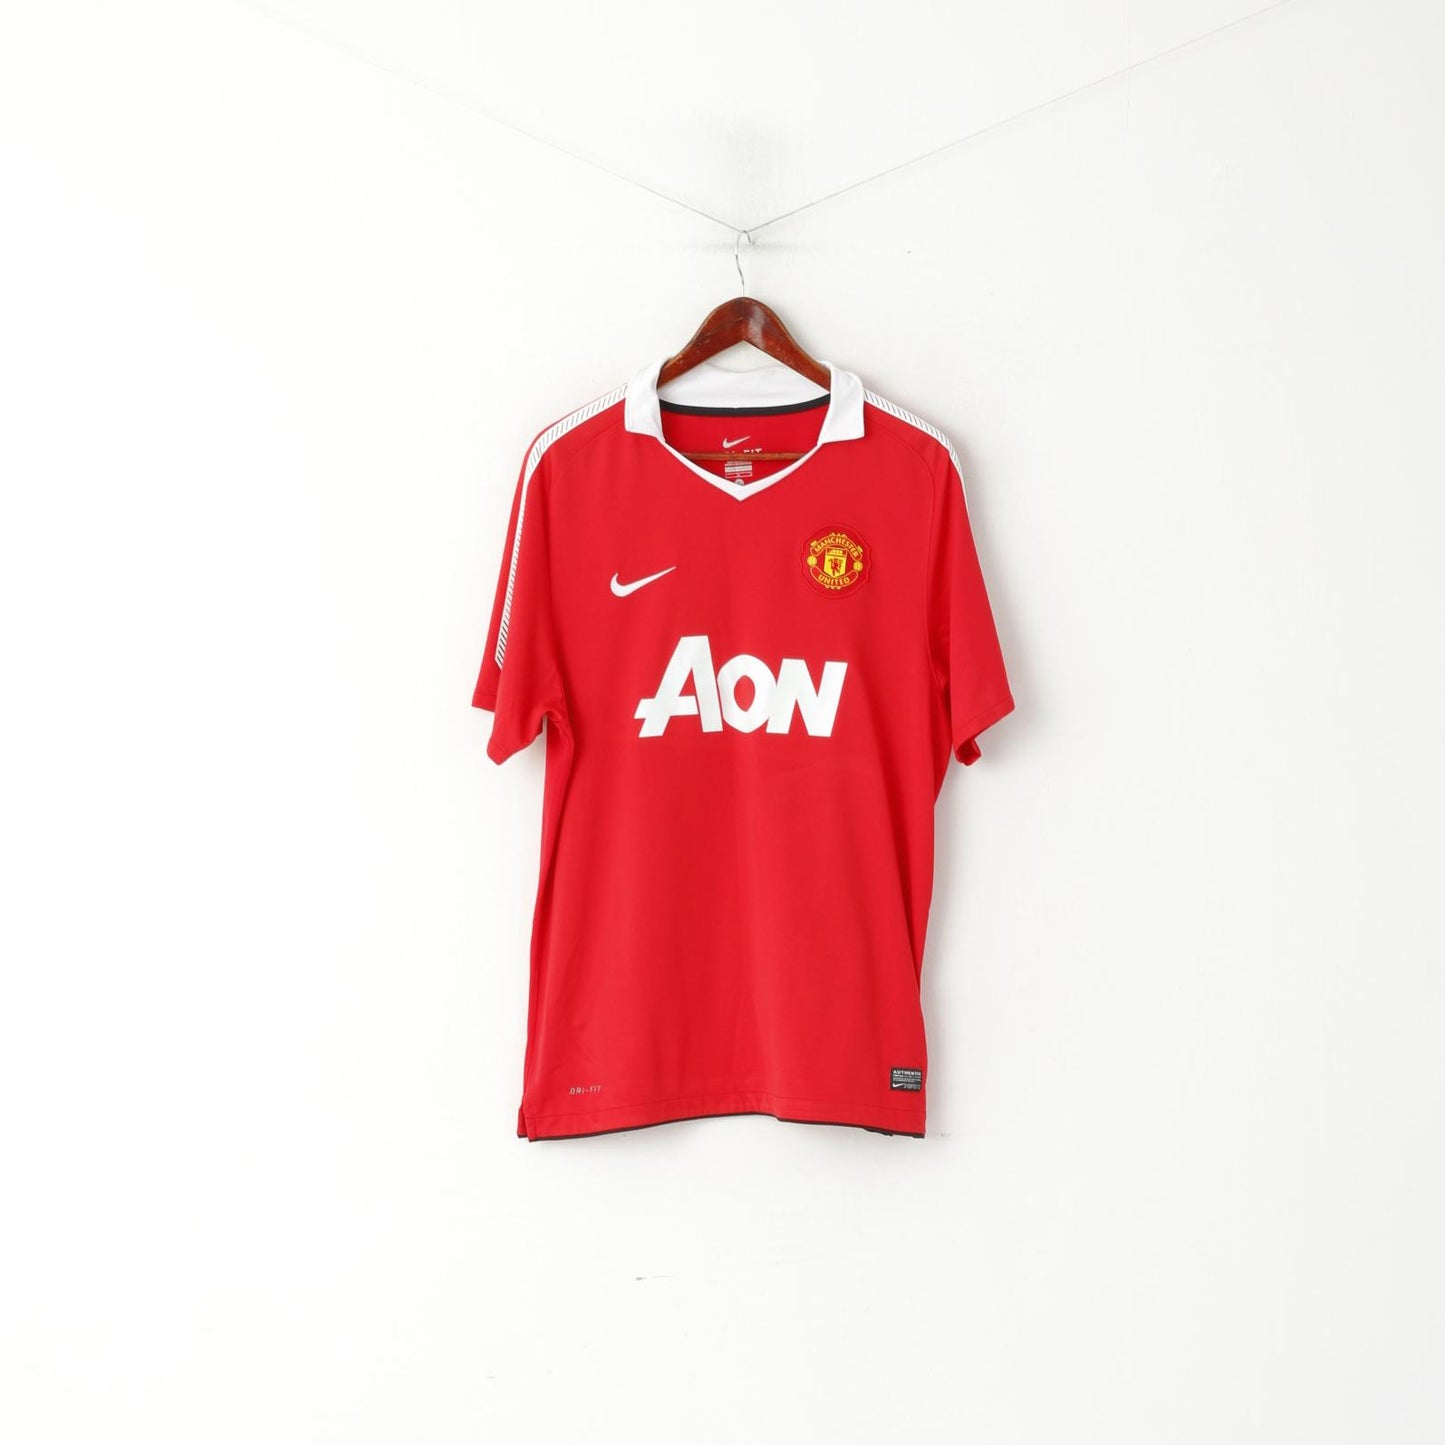 Nike Hommes L Chemise Rouge Manchester United Football Club MUFC Jersey Sport Top